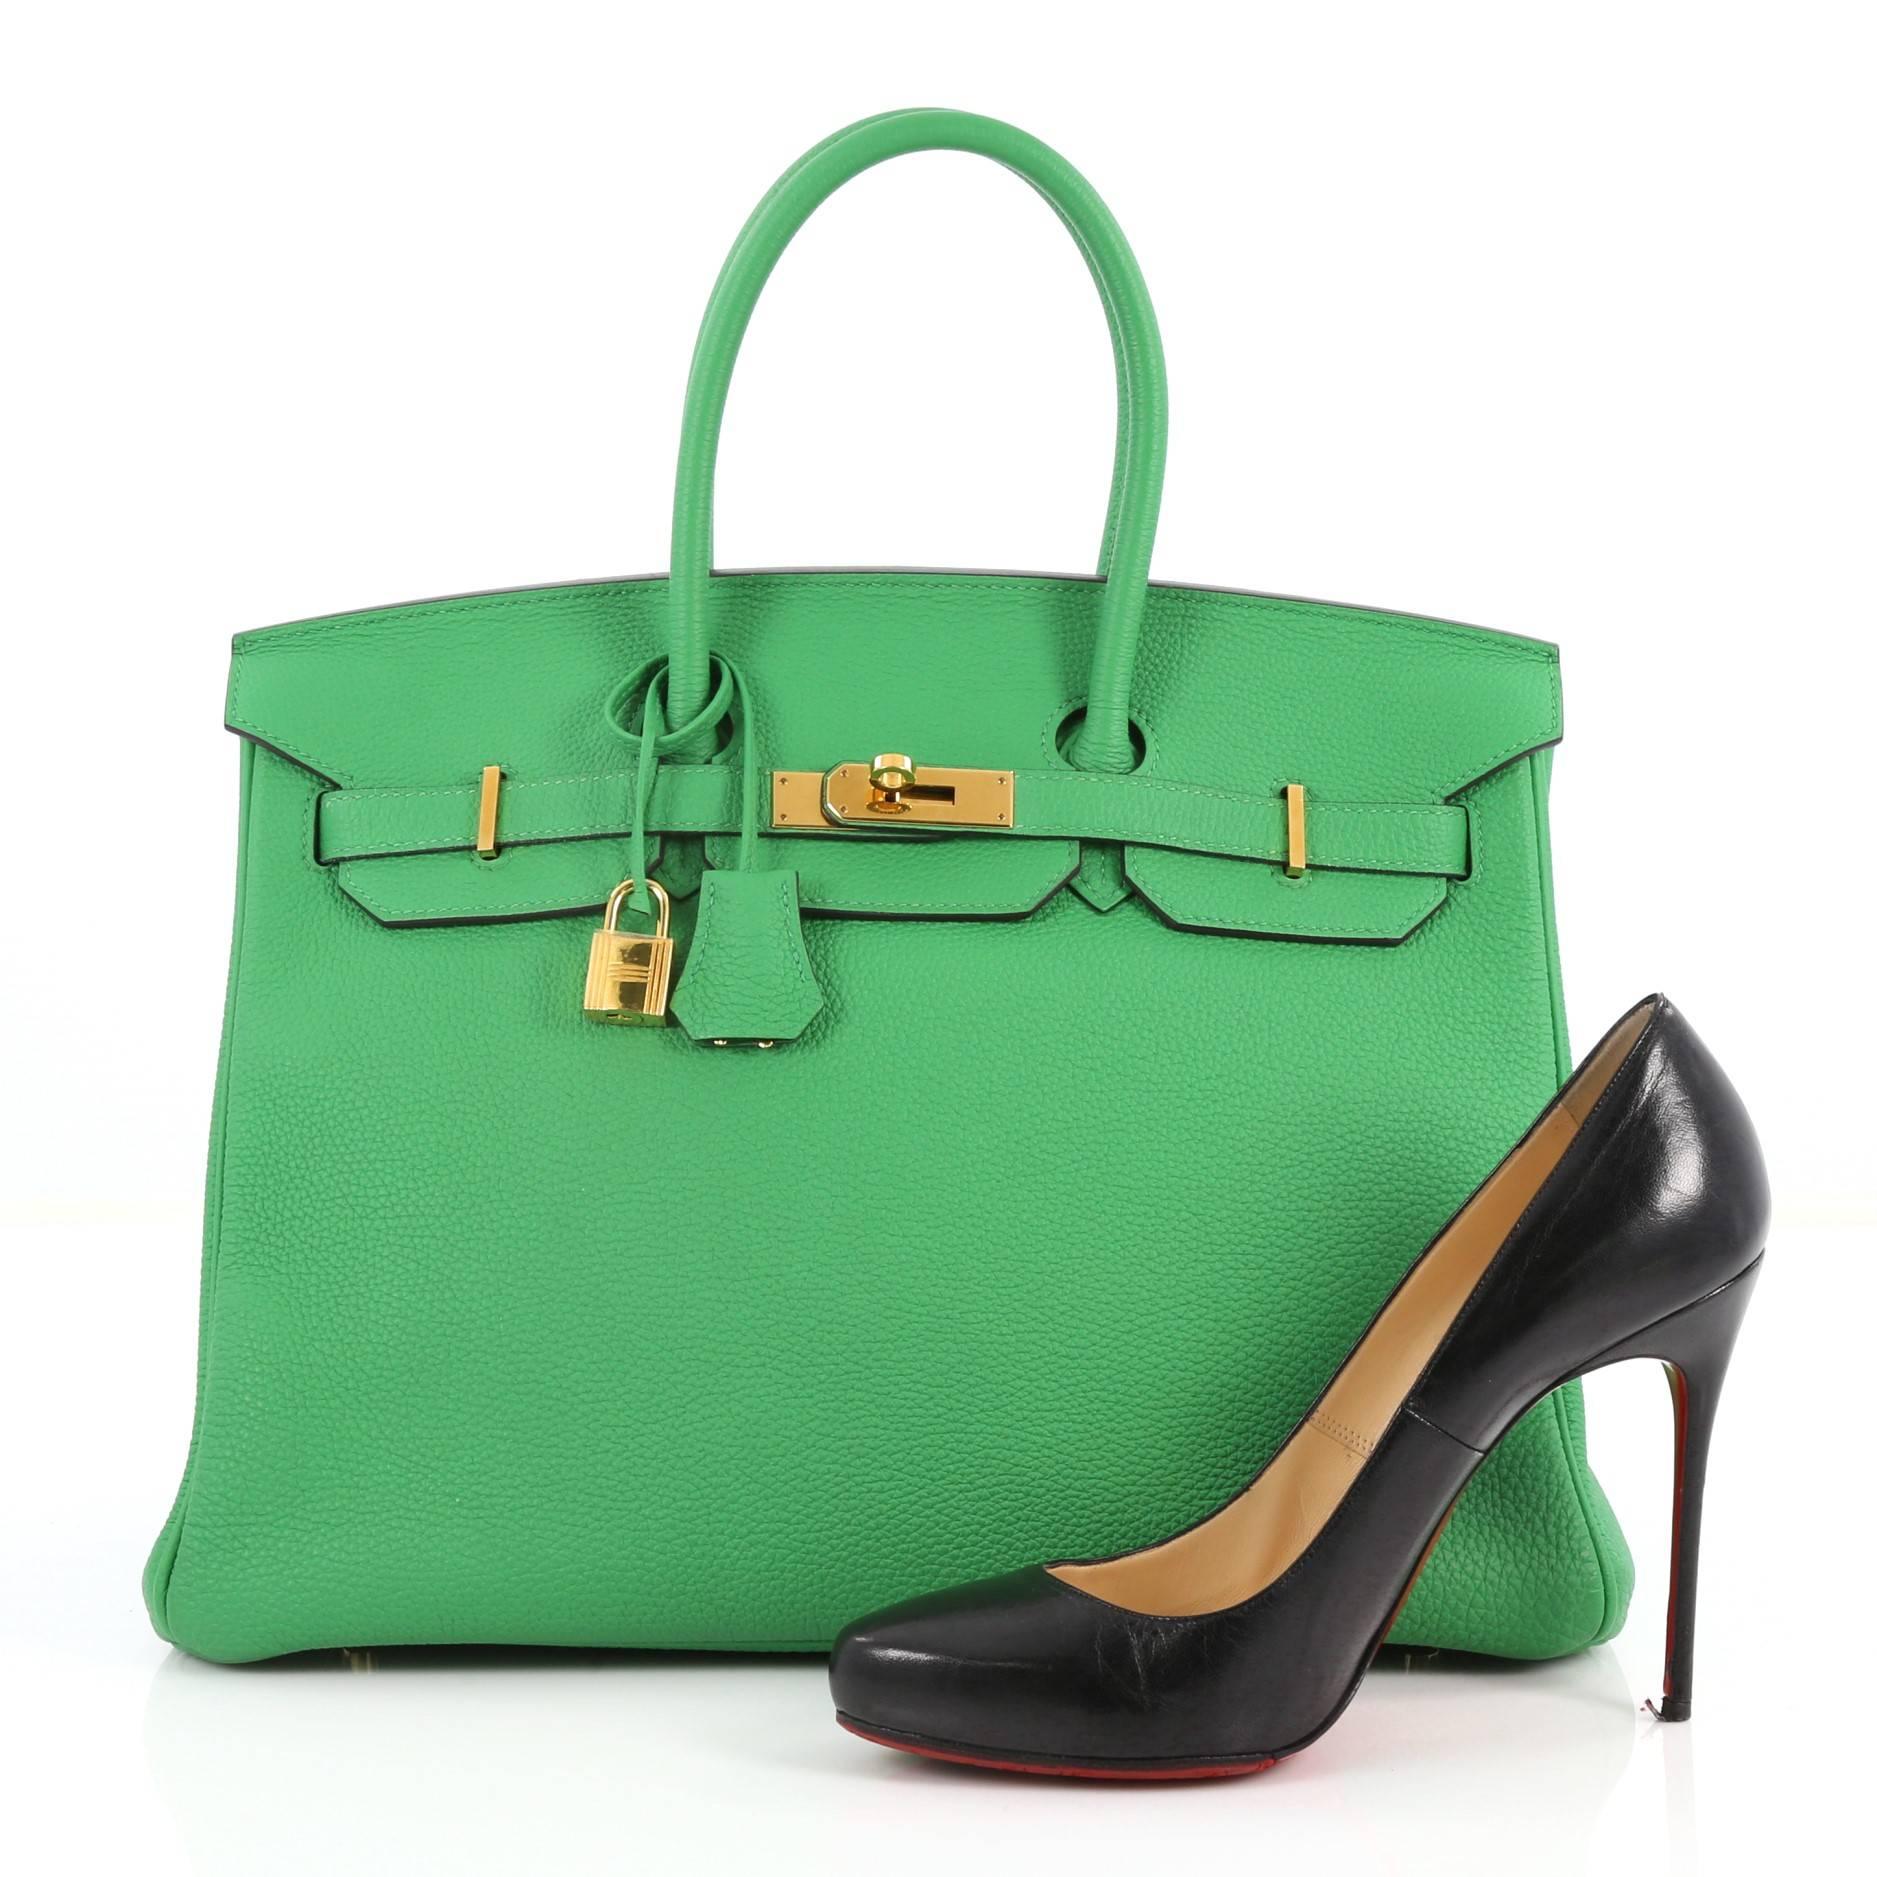 This authentic Hermes Birkin Handbag Bamboo Togo with Gold Hardware 35 stands as one of the most-coveted and timeless bags fit for any fashionista. Constructed from scratch-resistant bamboo green togo leather, this subtly sleek tote features